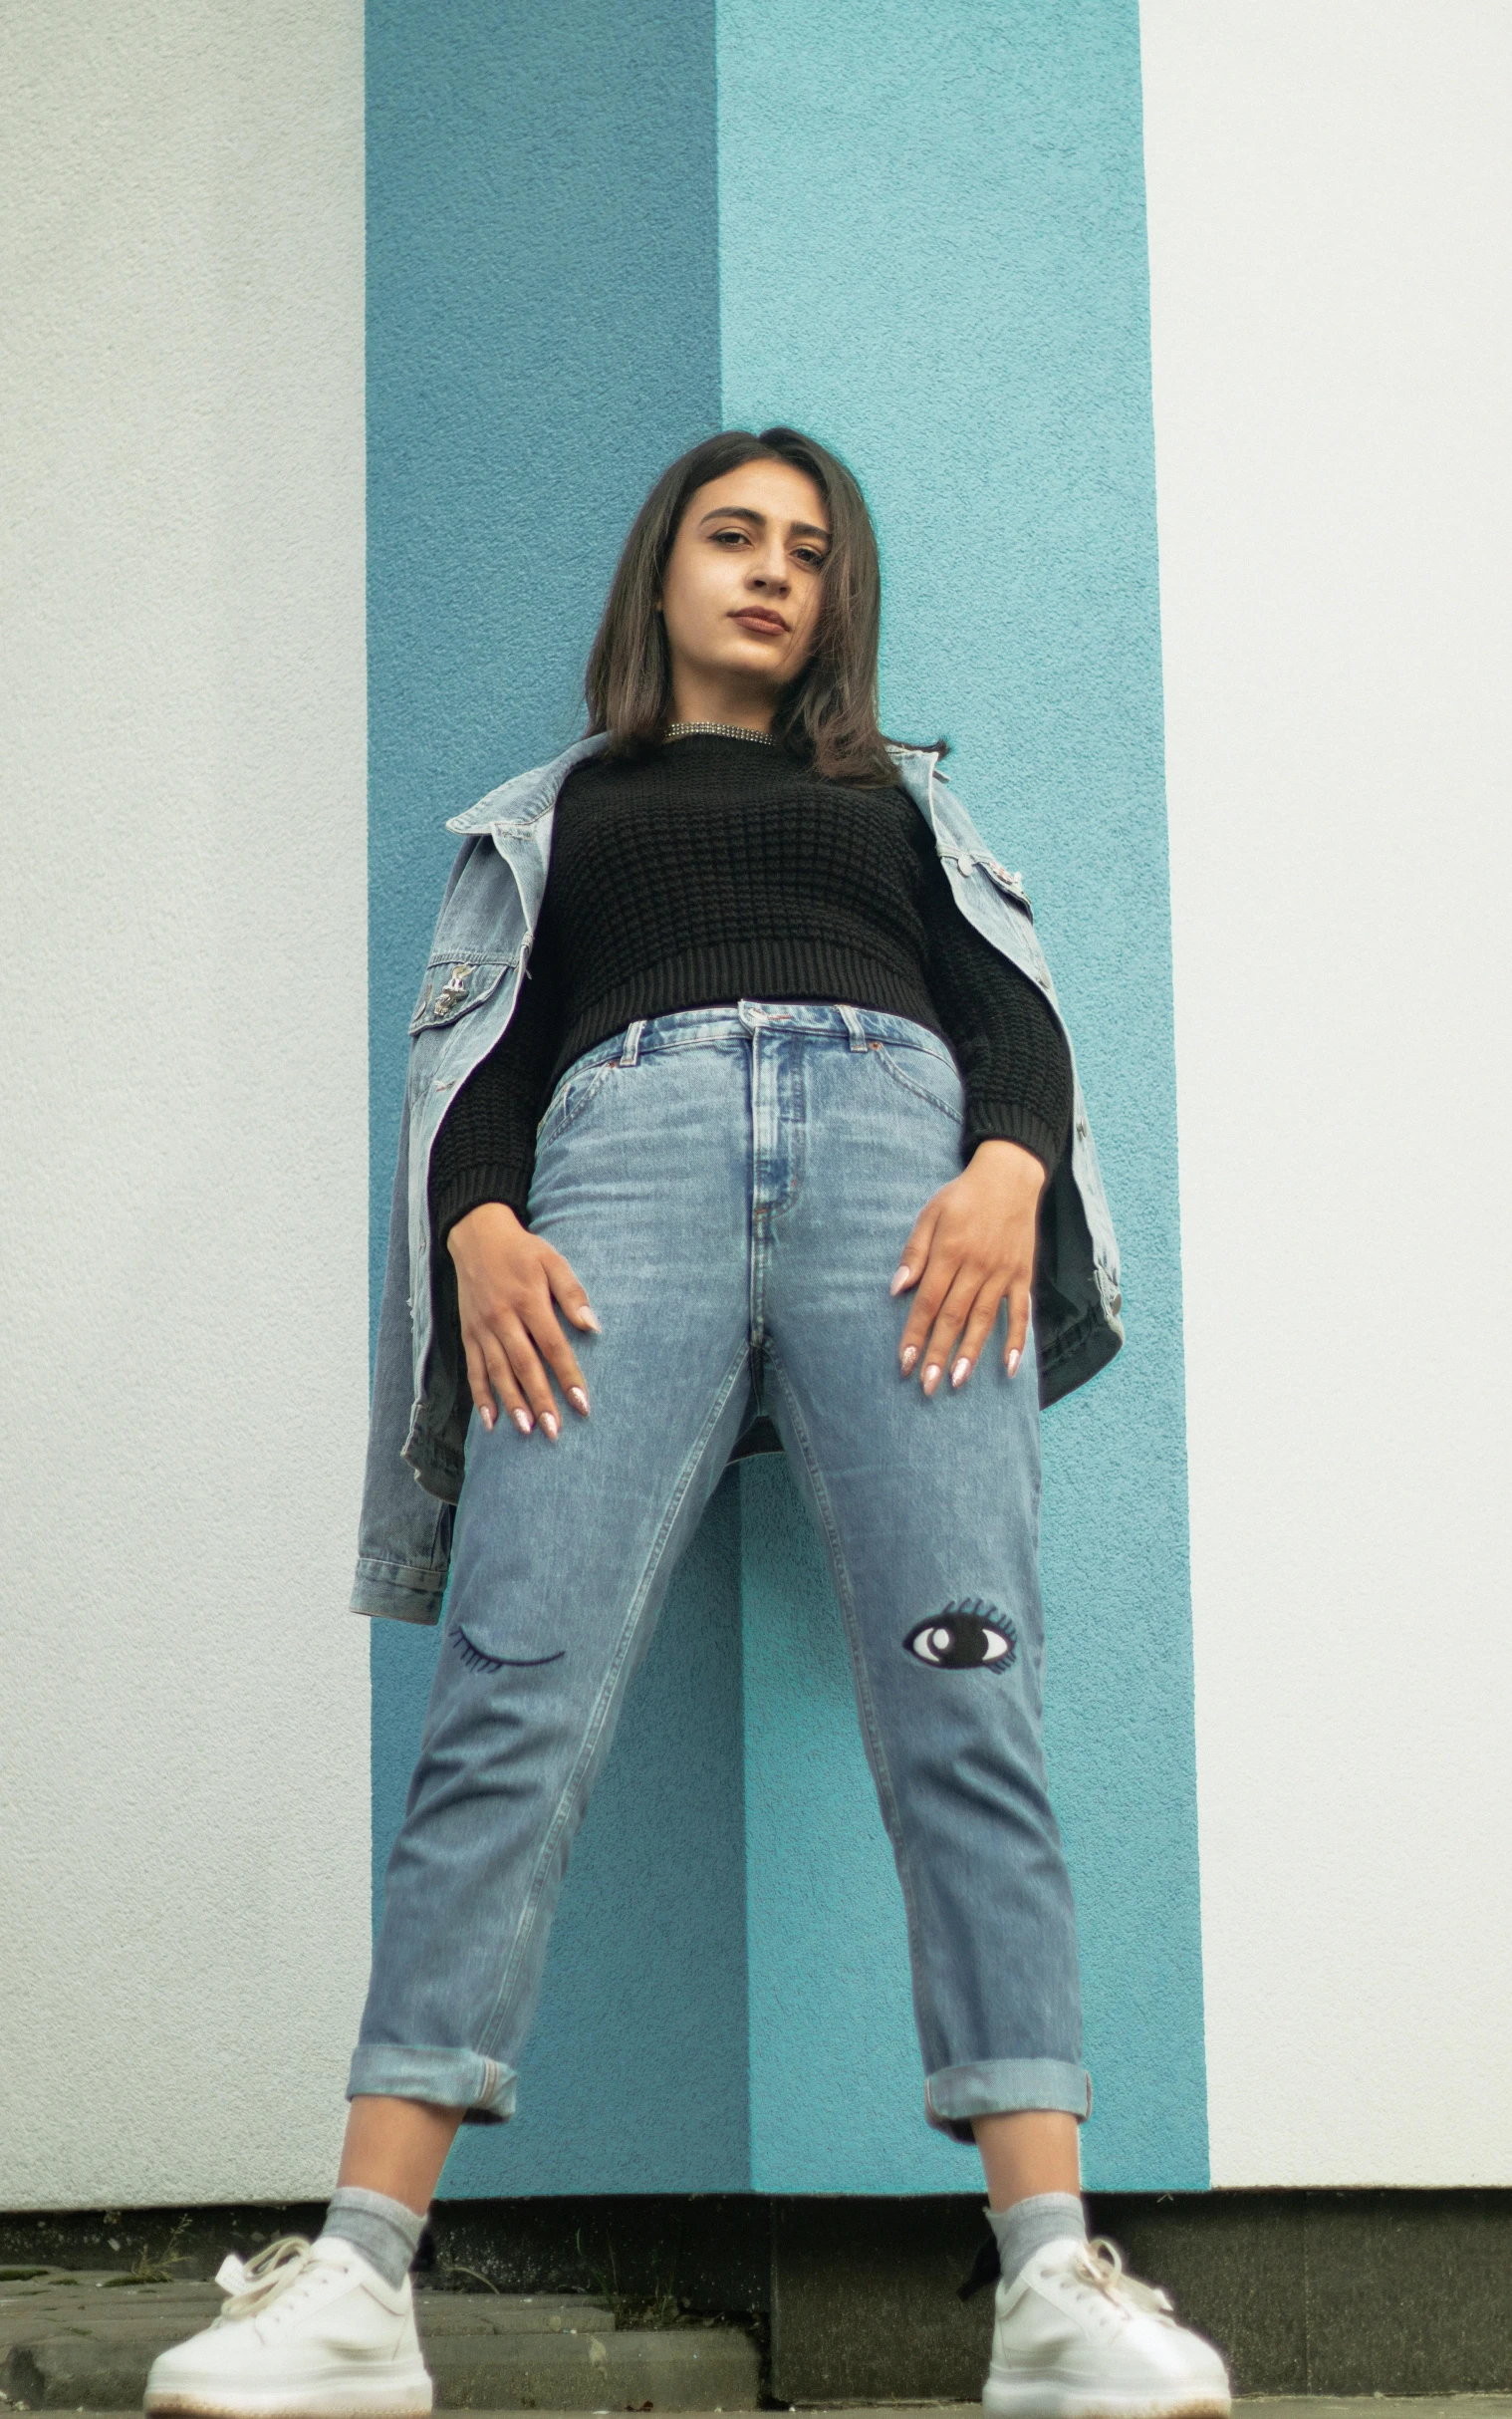 a woman leaning against a blue and white wall, an album cover, inspired by Amelia Peláez, antipodeans, wearing jeans and a black hoodie, wearing a patch over one eye, wearing cargo pants, vista view